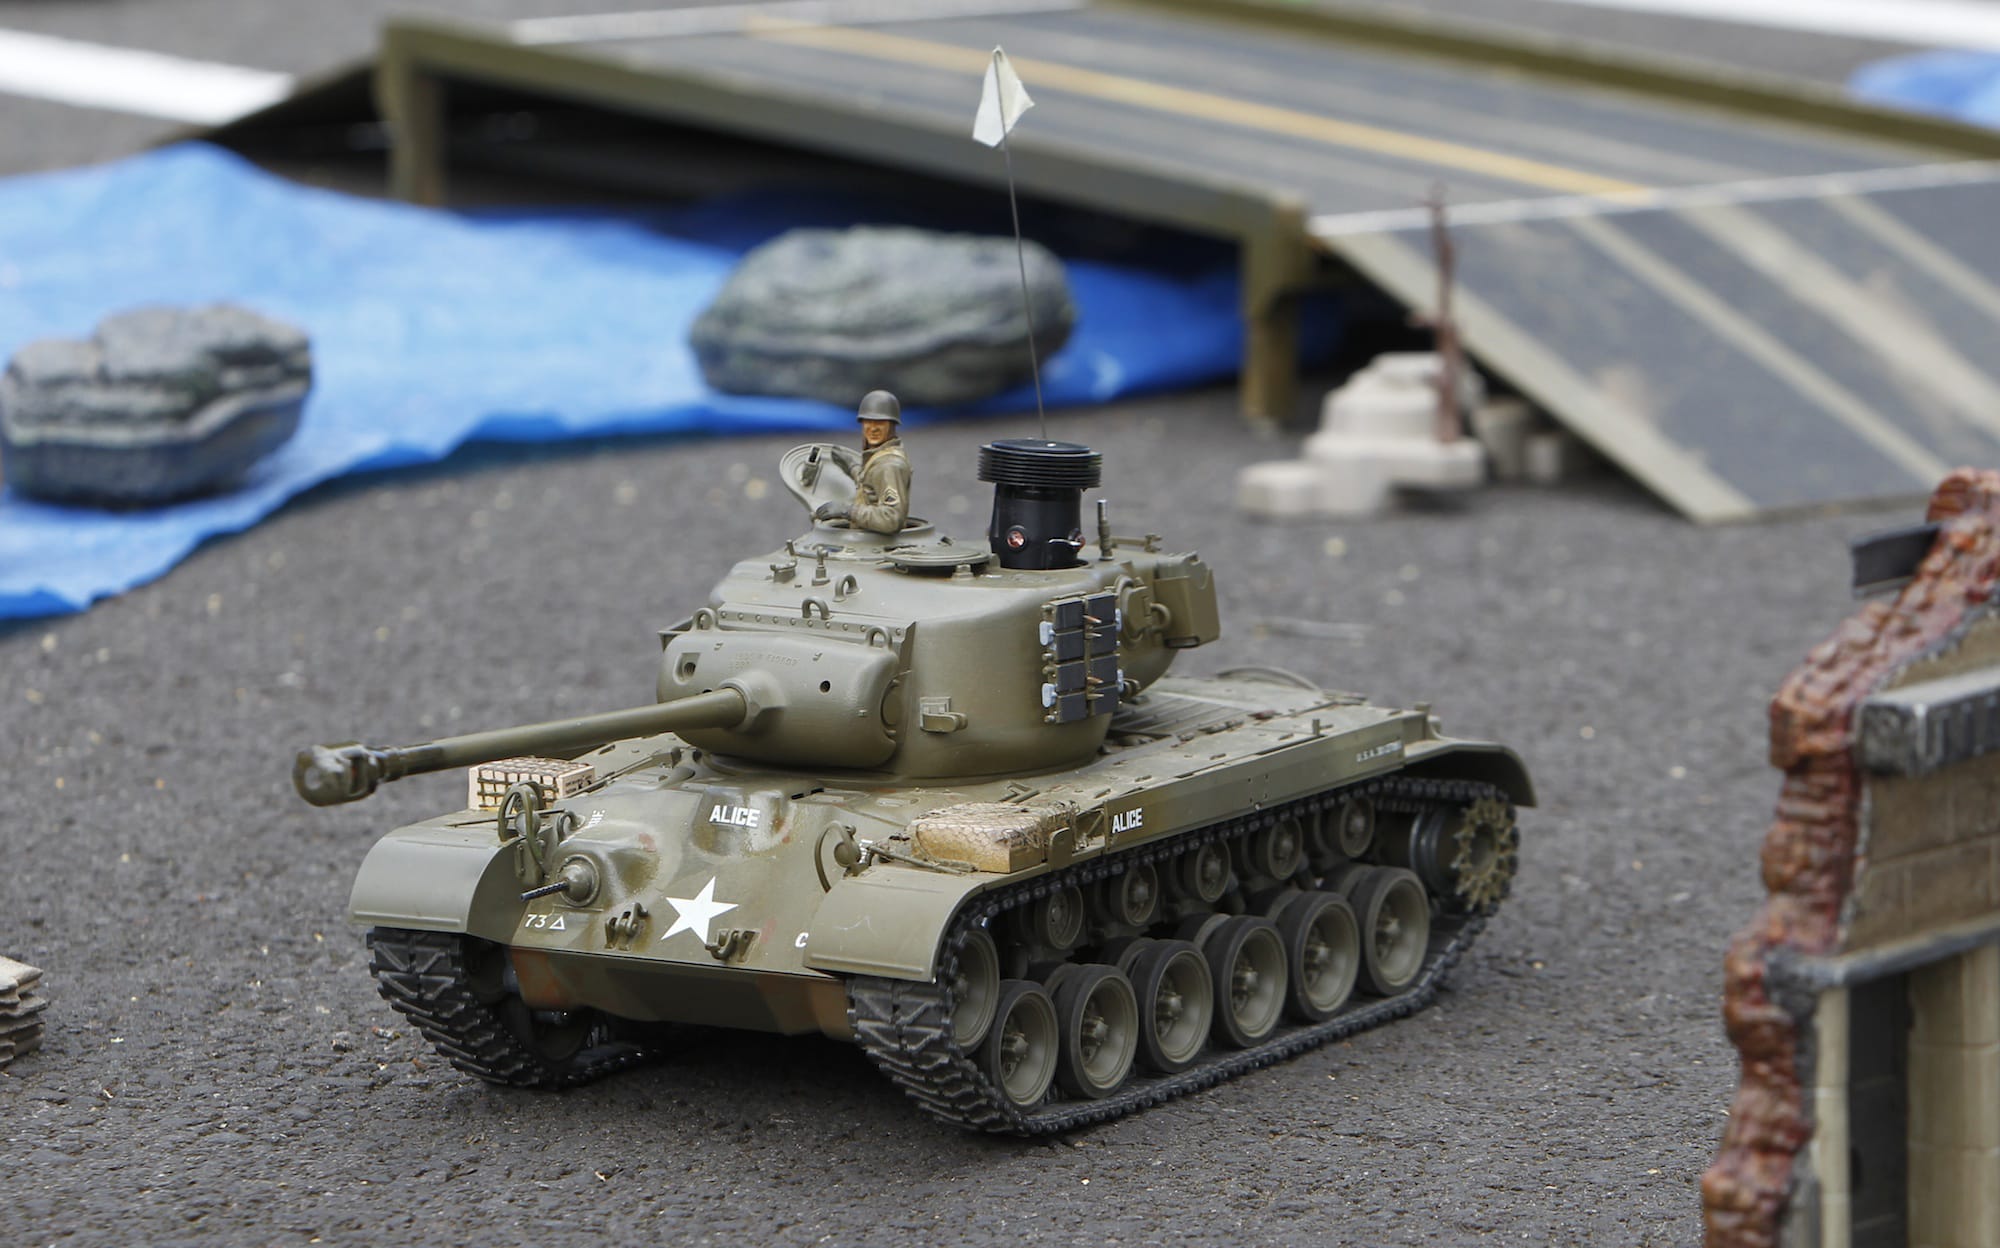 A remote control tank heads into battle at the Veterans Museum on Saturday.